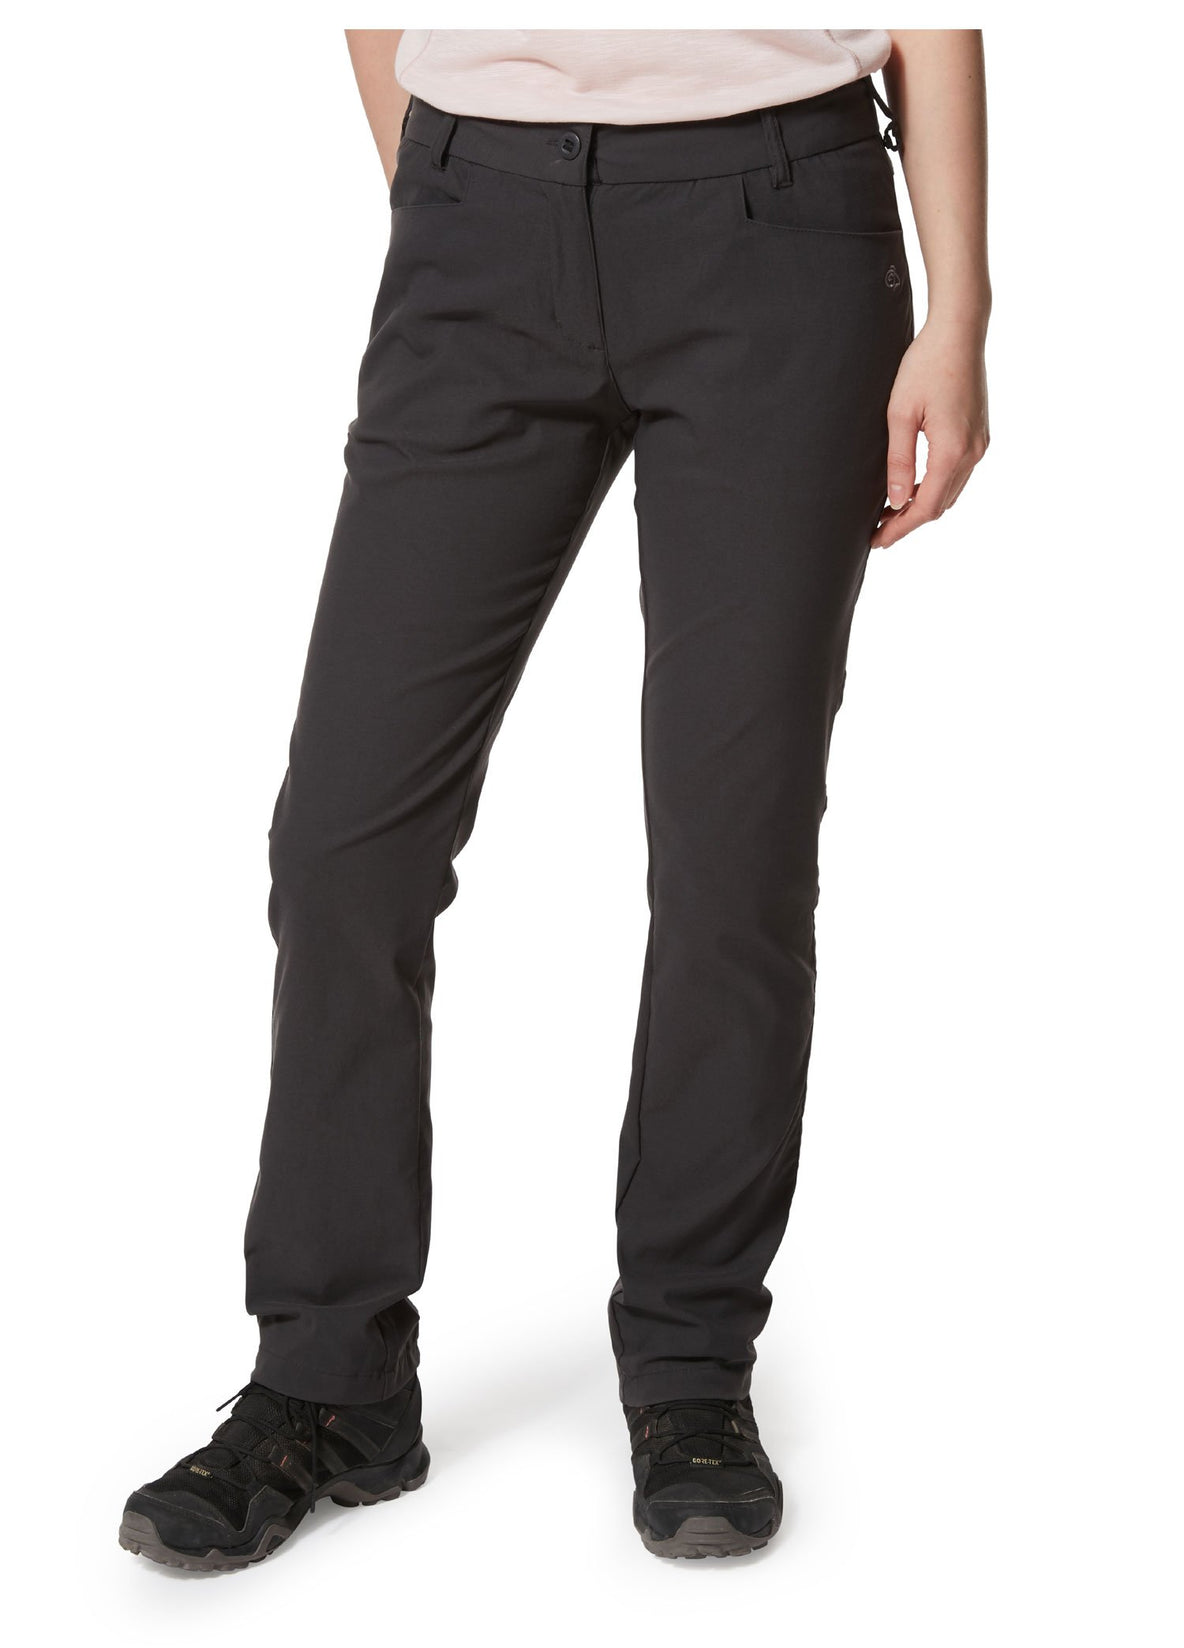 Front view charcoal trousers